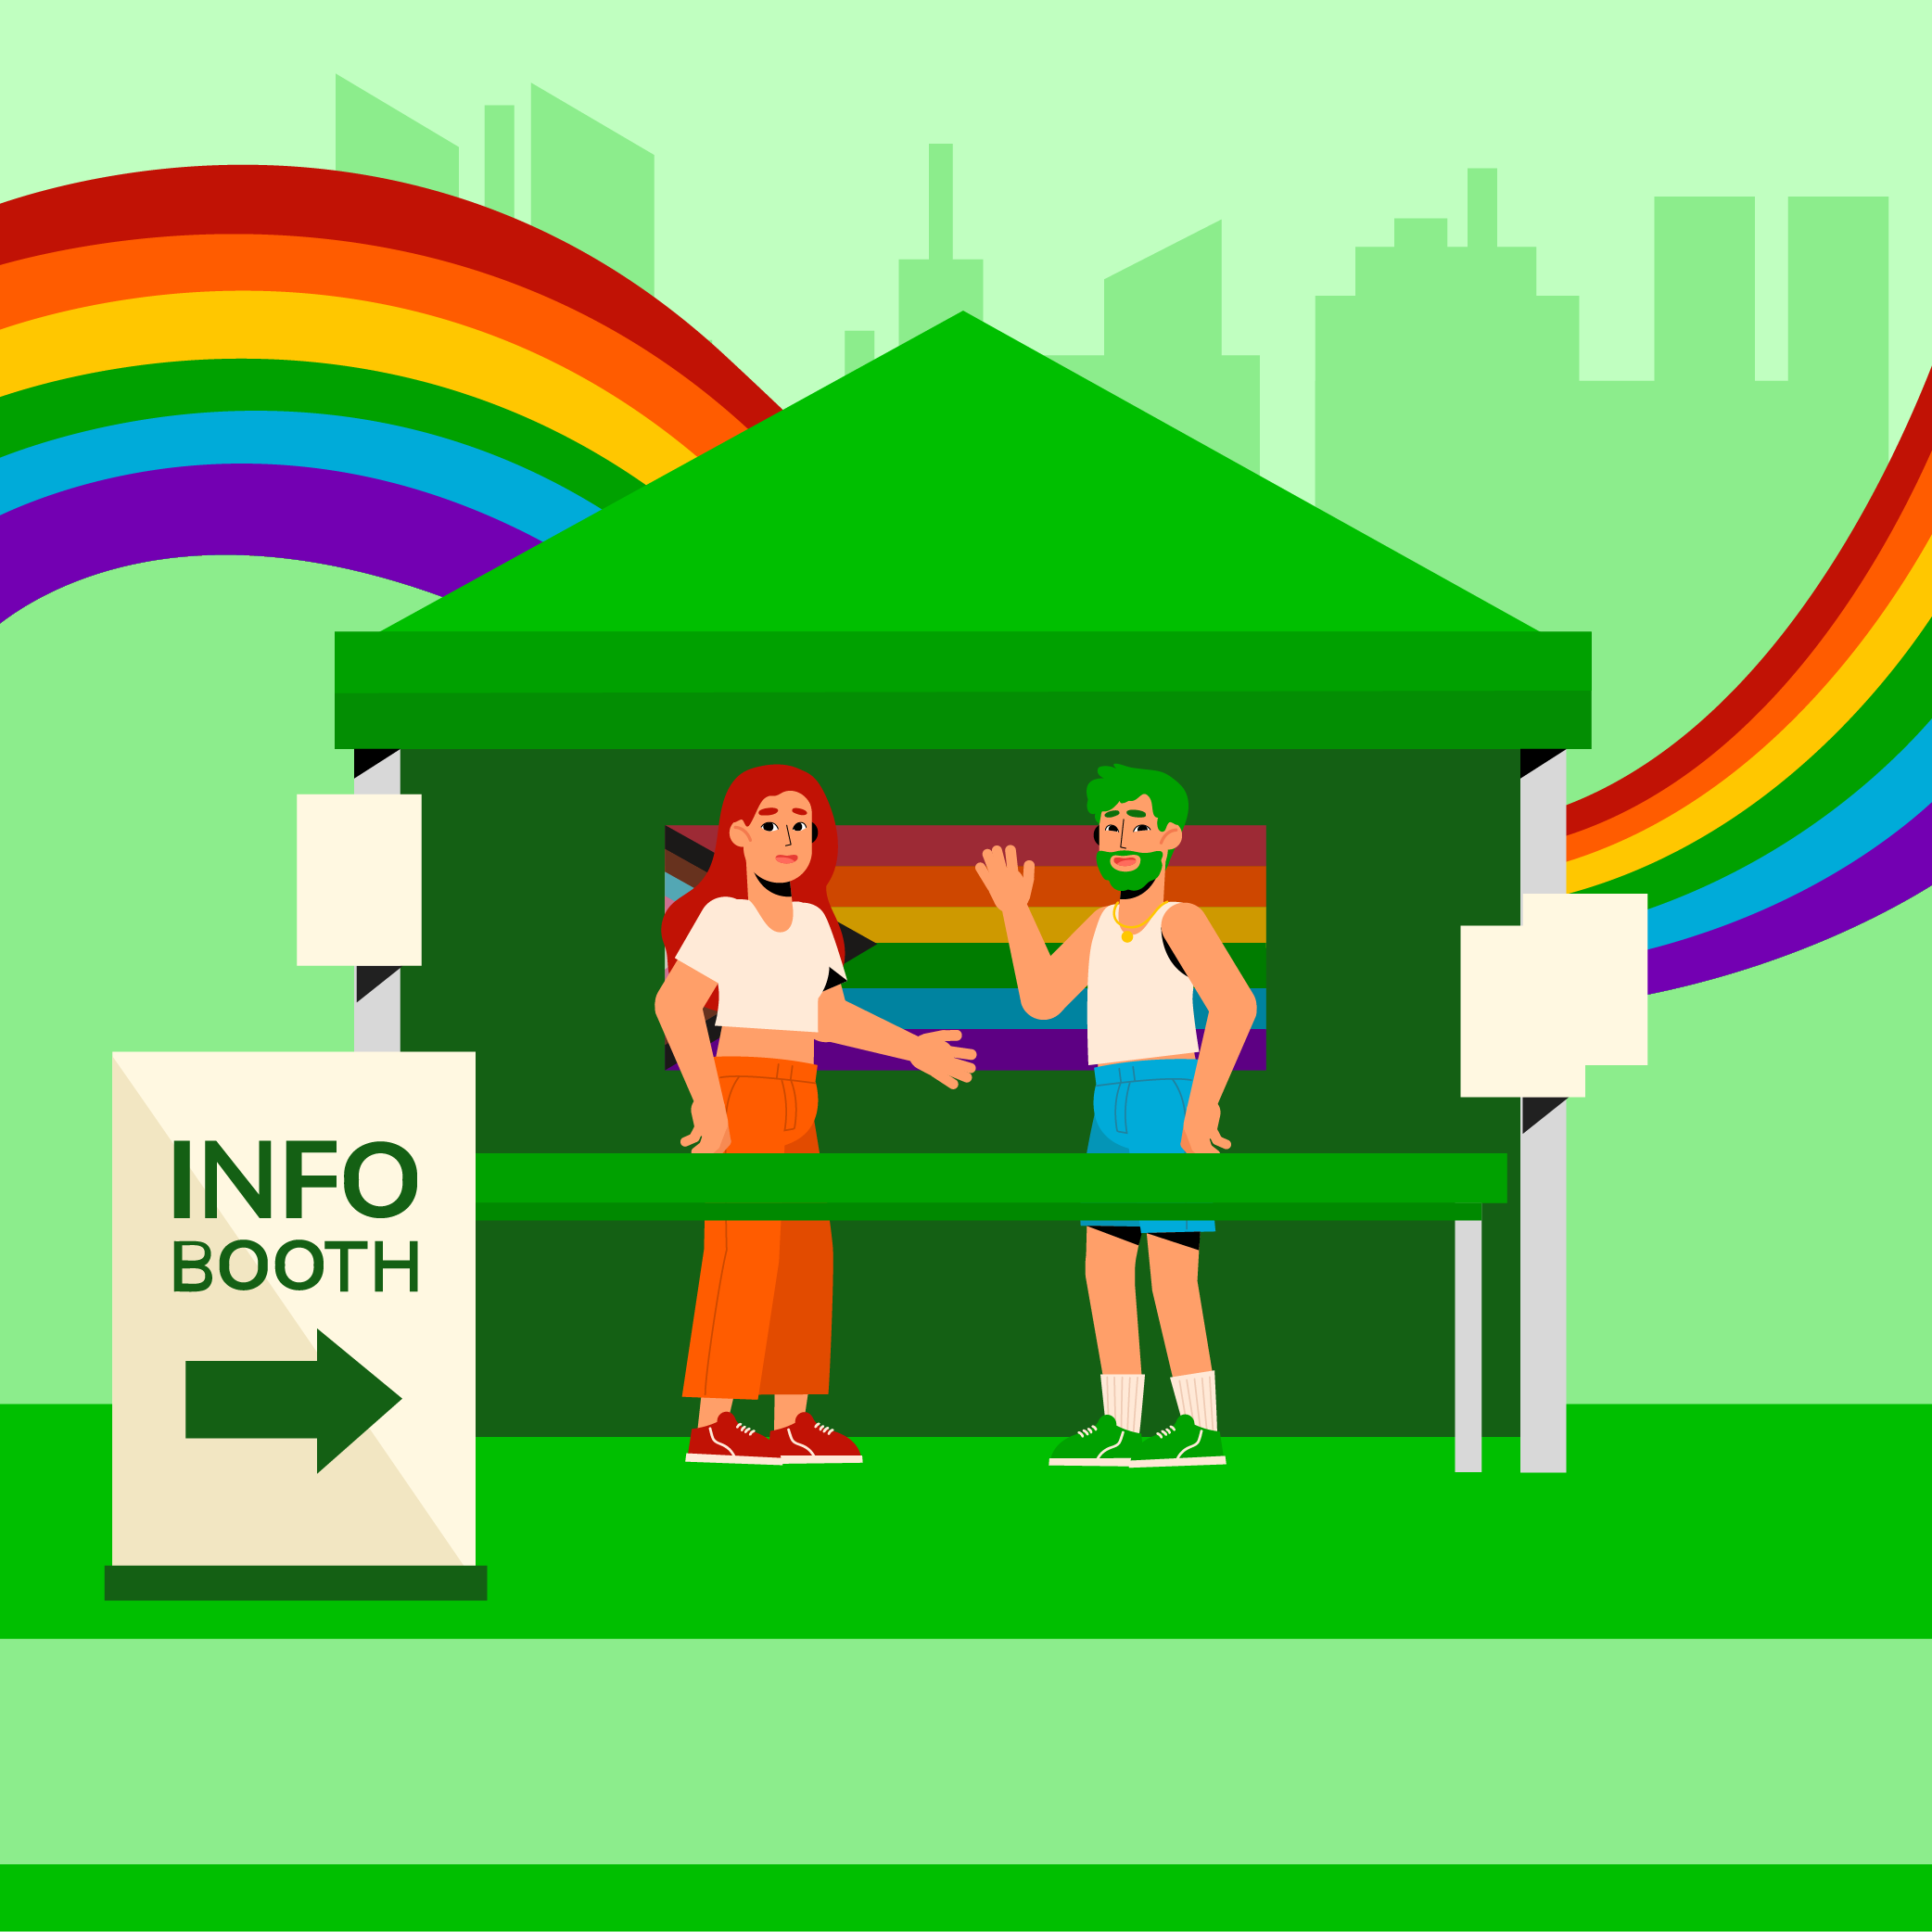 Environmental, Harm Reduction, and Info Booths